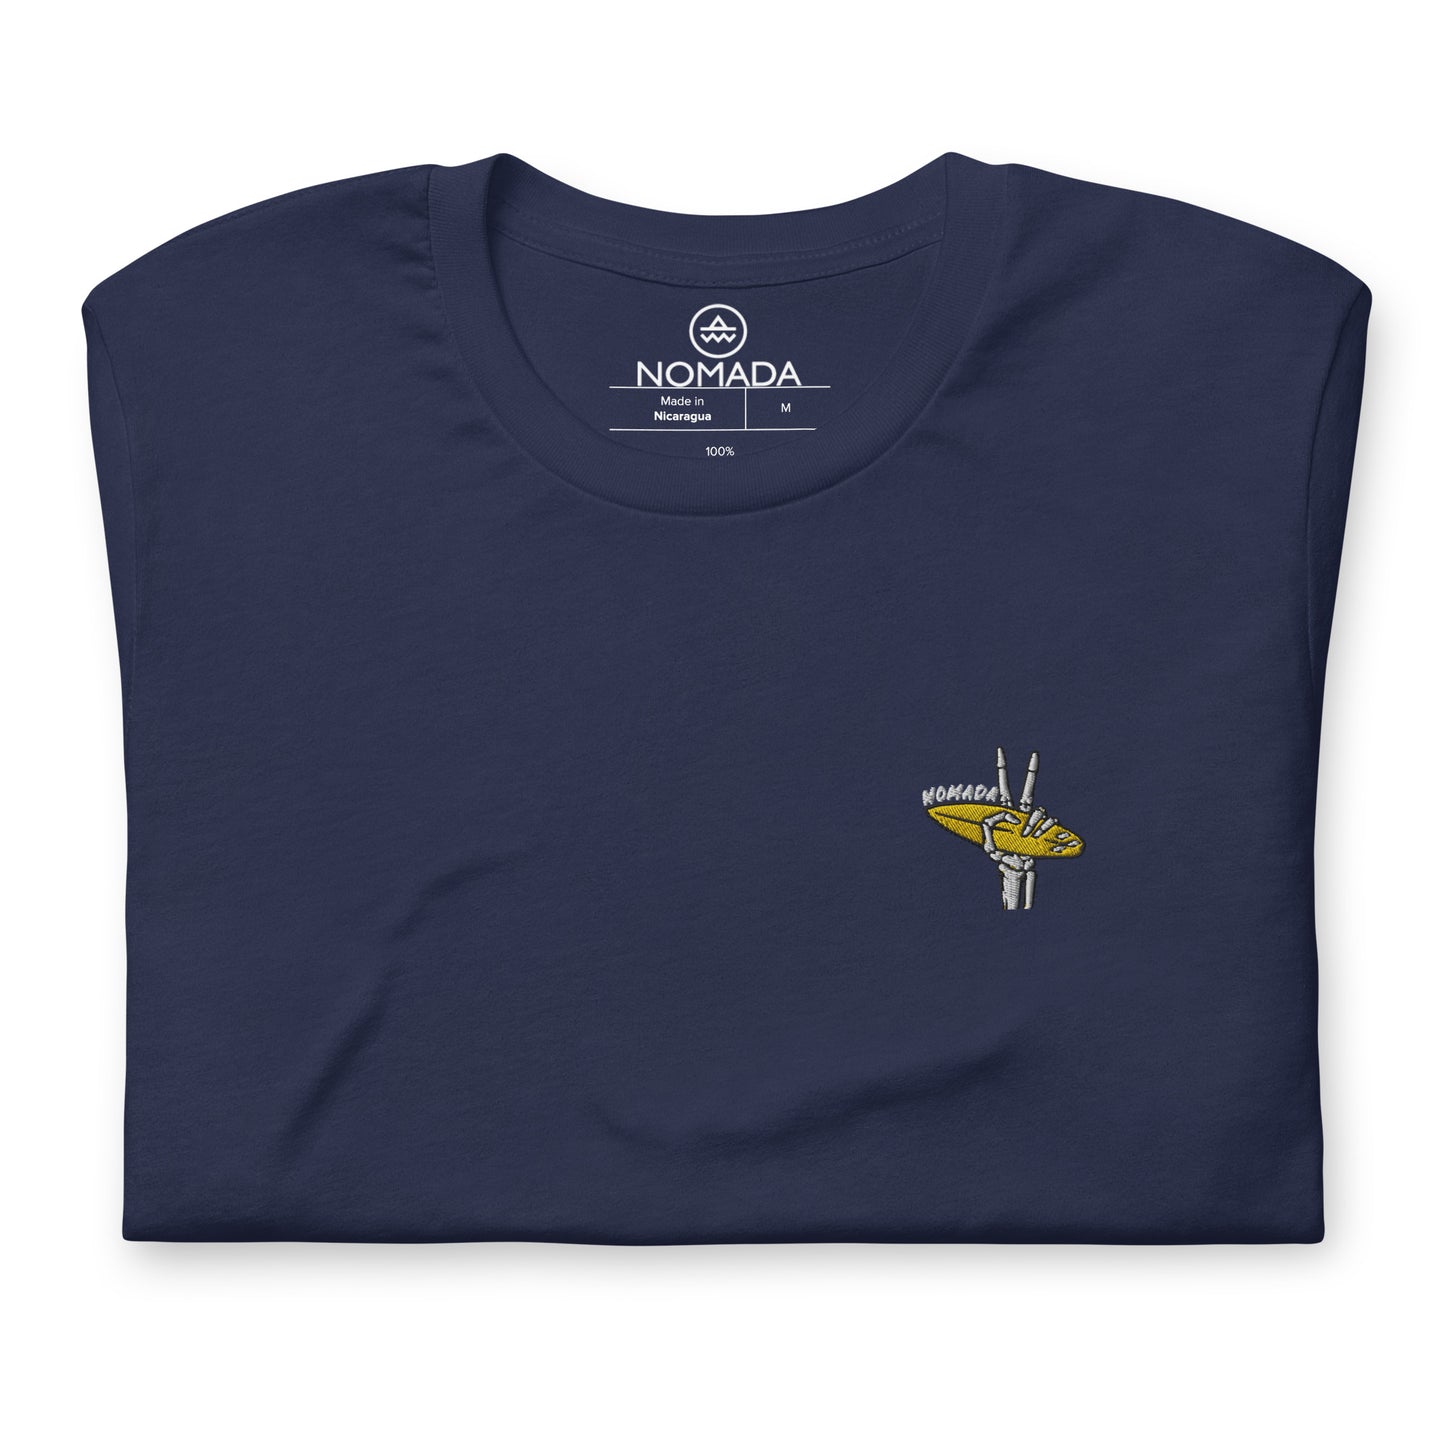 NOMADA Skeleton Hand Showing Peach Sign while holding a Surfboard embroidered T-Shirt, Navy Blue color shirt